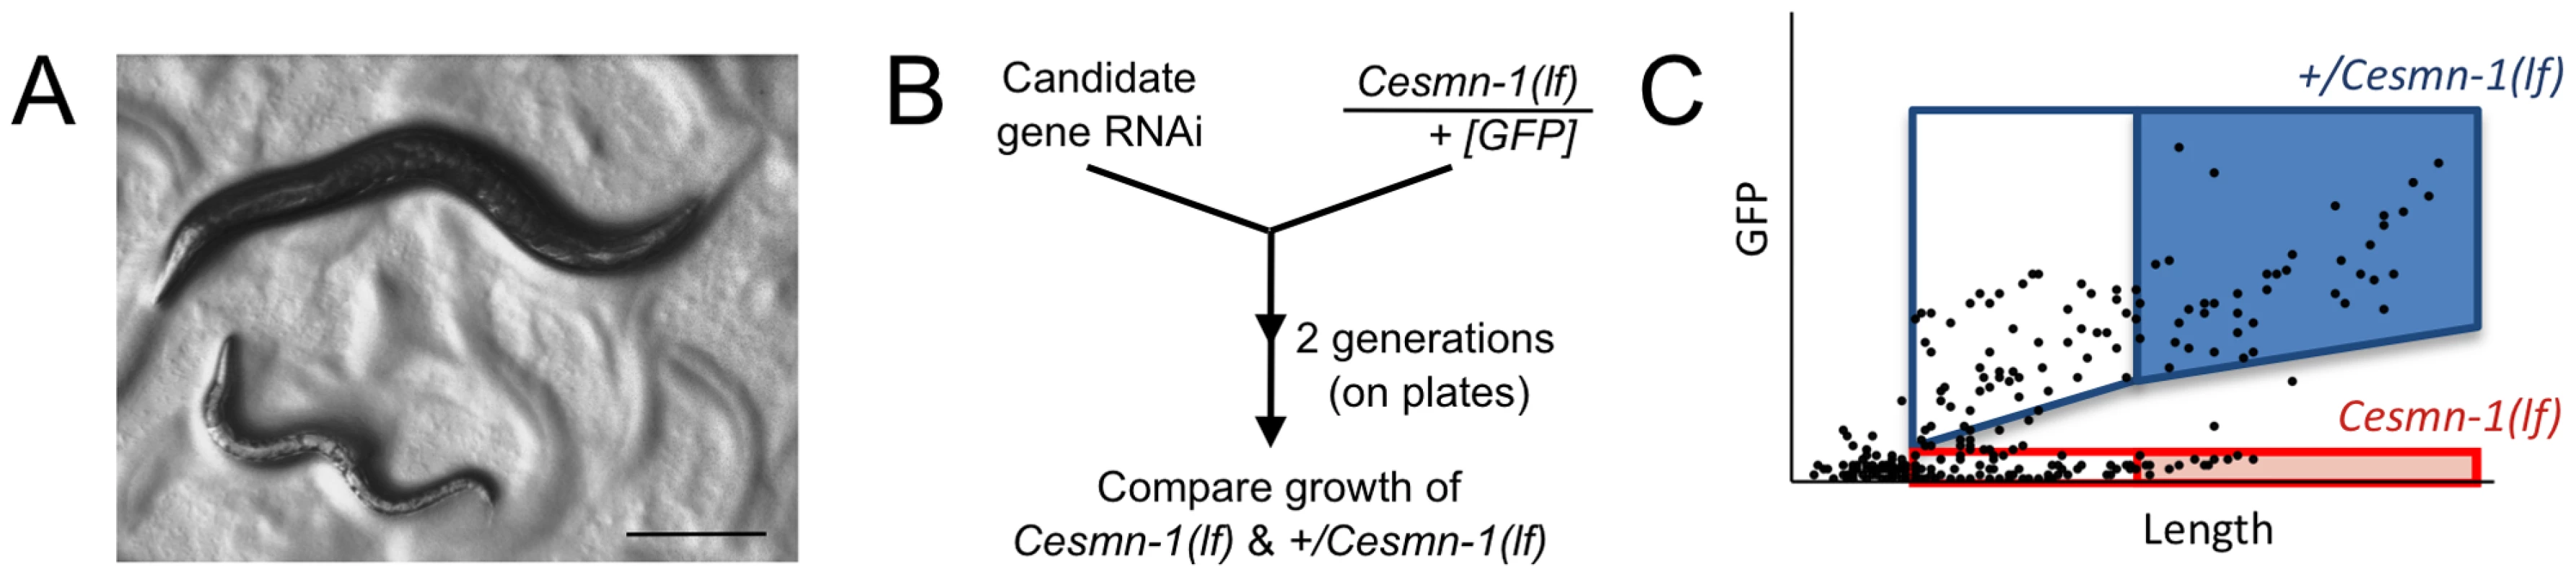 Survival and average length of <i>Cesmn-1(lf)</i> animals is decreased.